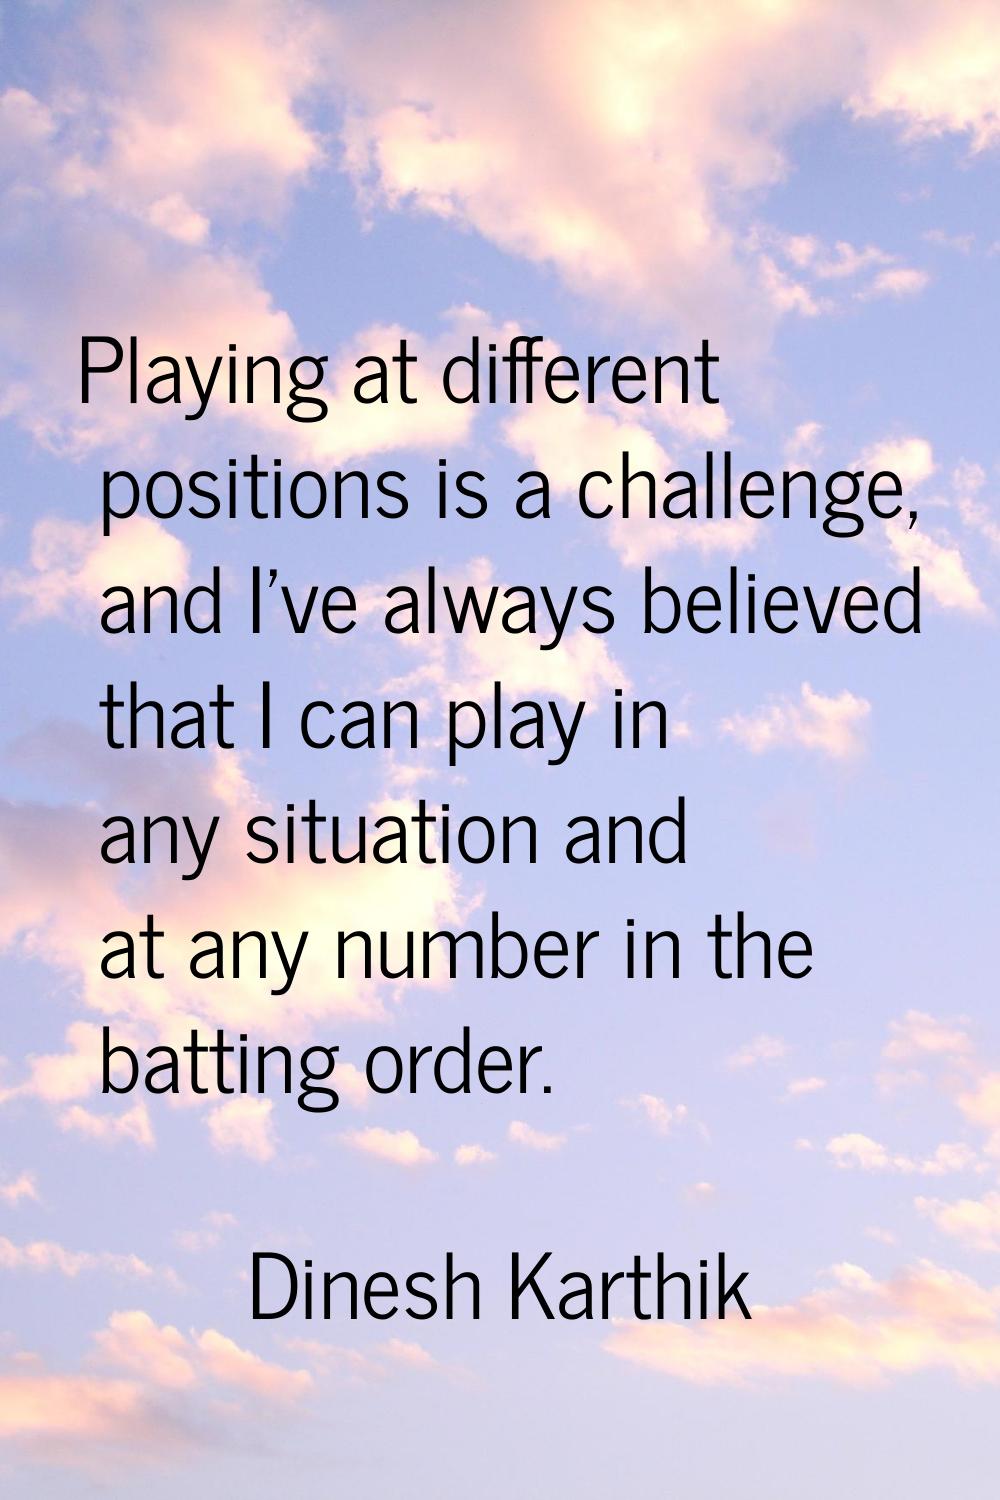 Playing at different positions is a challenge, and I've always believed that I can play in any situ